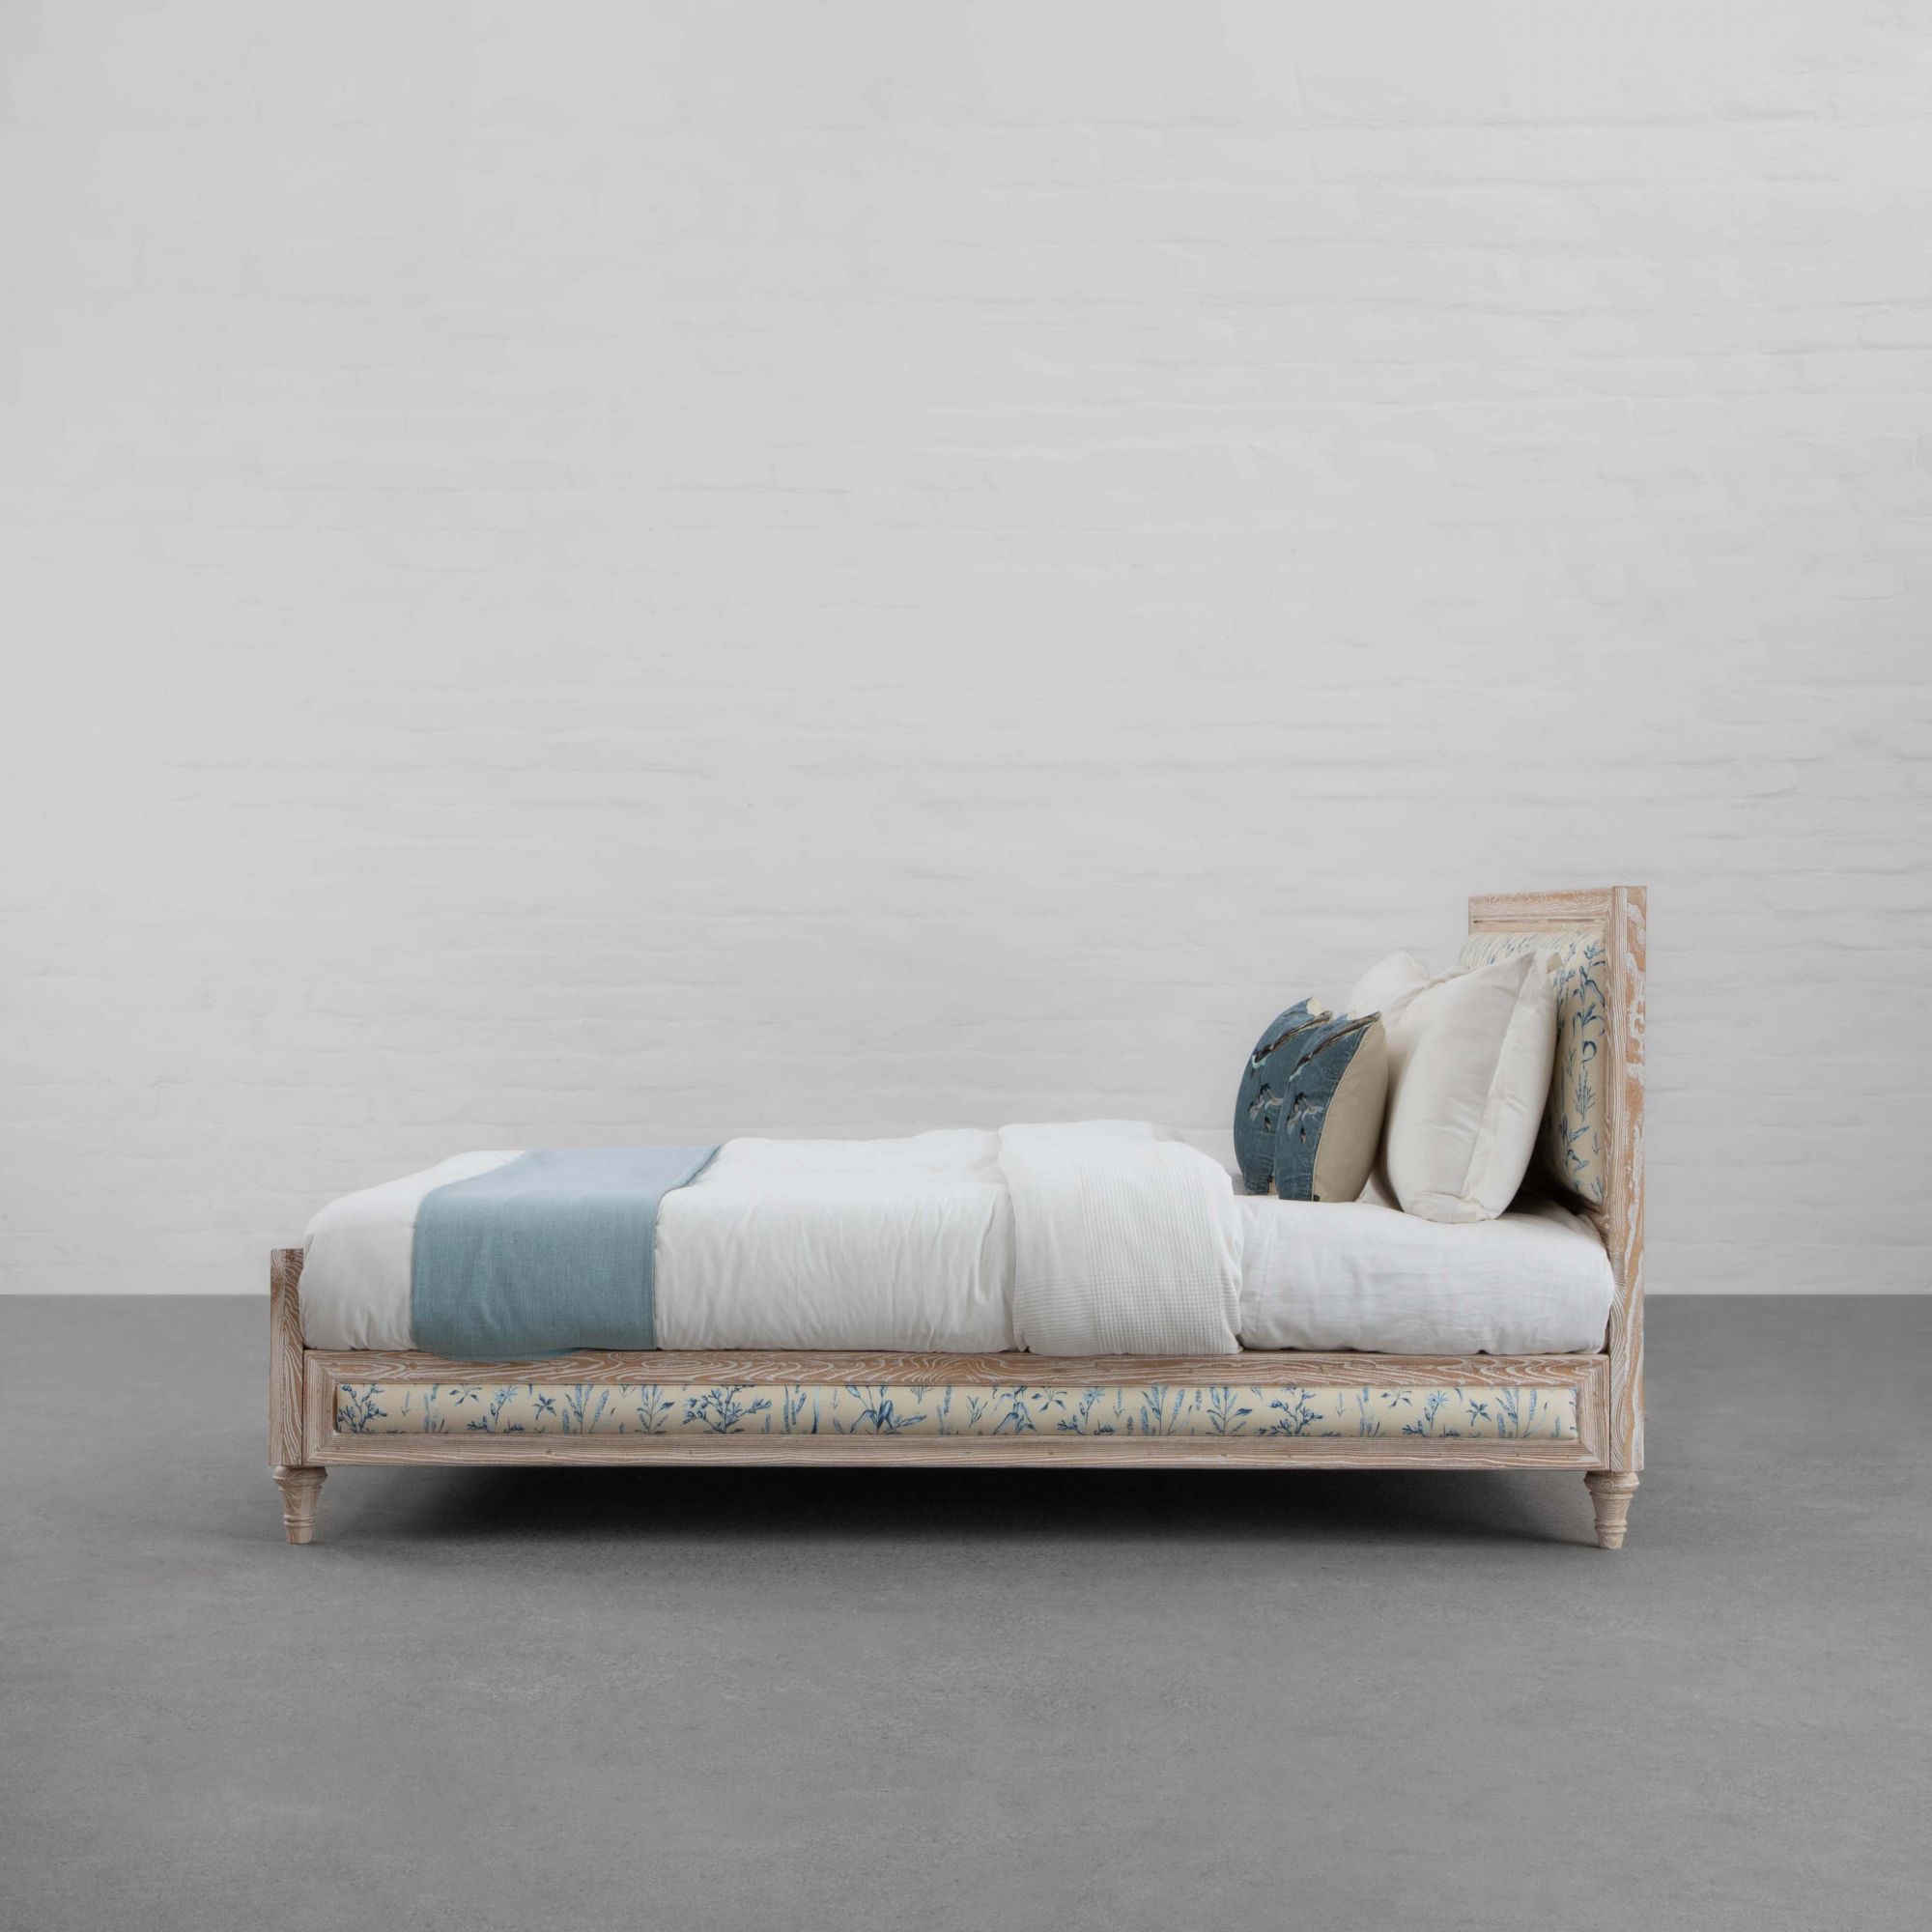 Lyon French Bed Collection